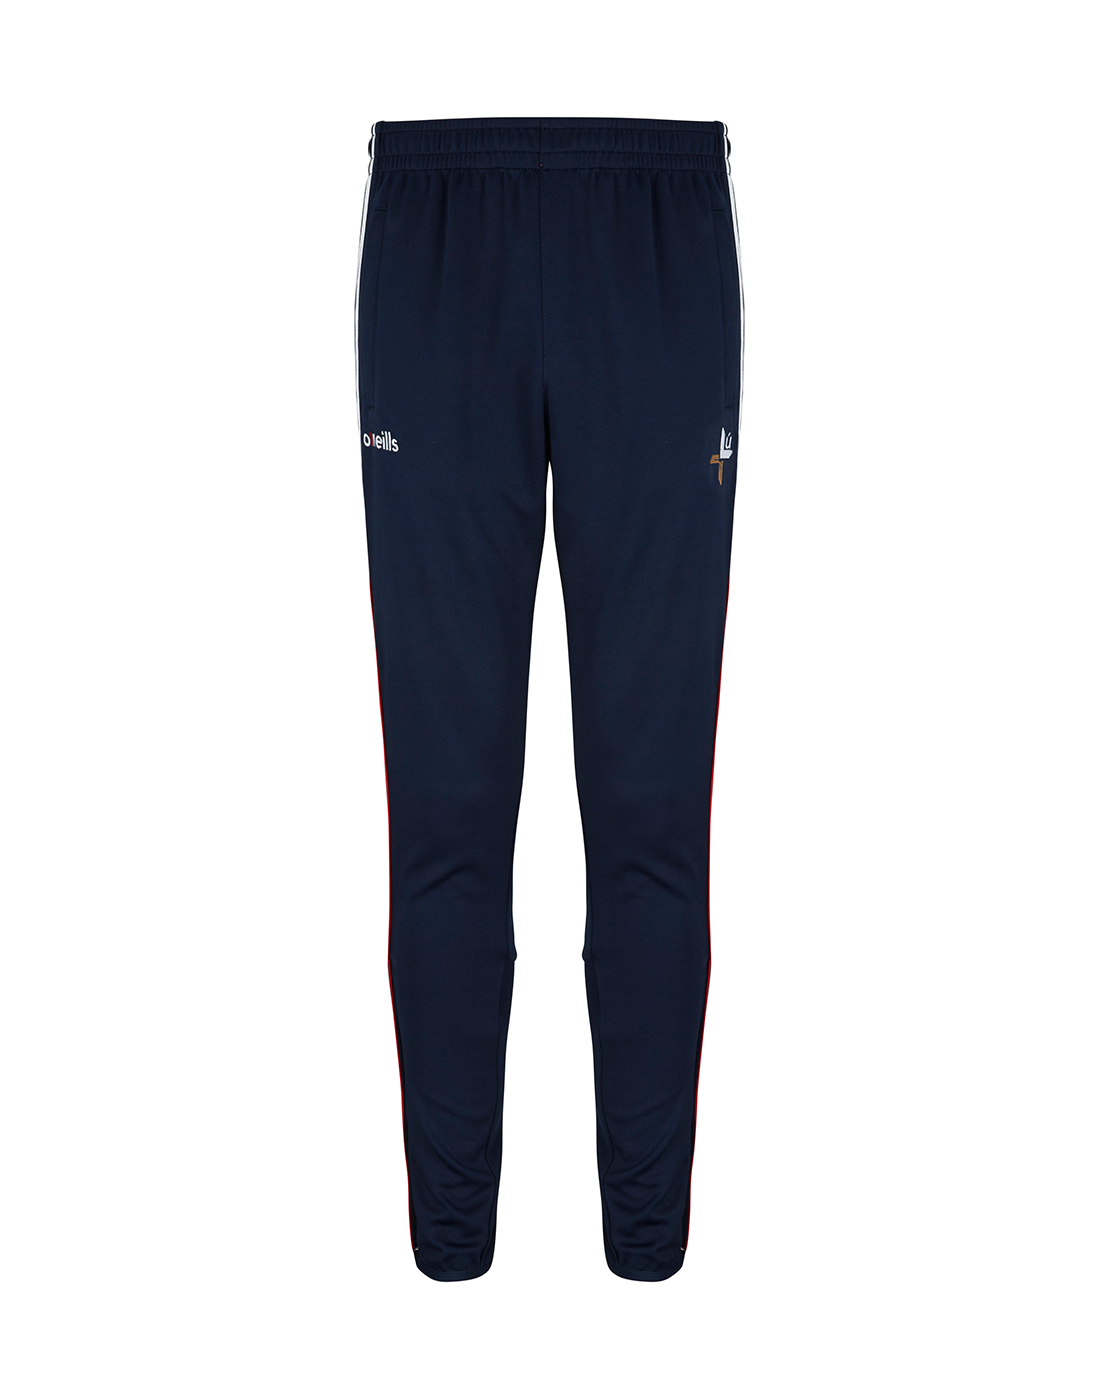 O'Neills Adult Louth Solar Pants - Navy | Life Style Sports IE